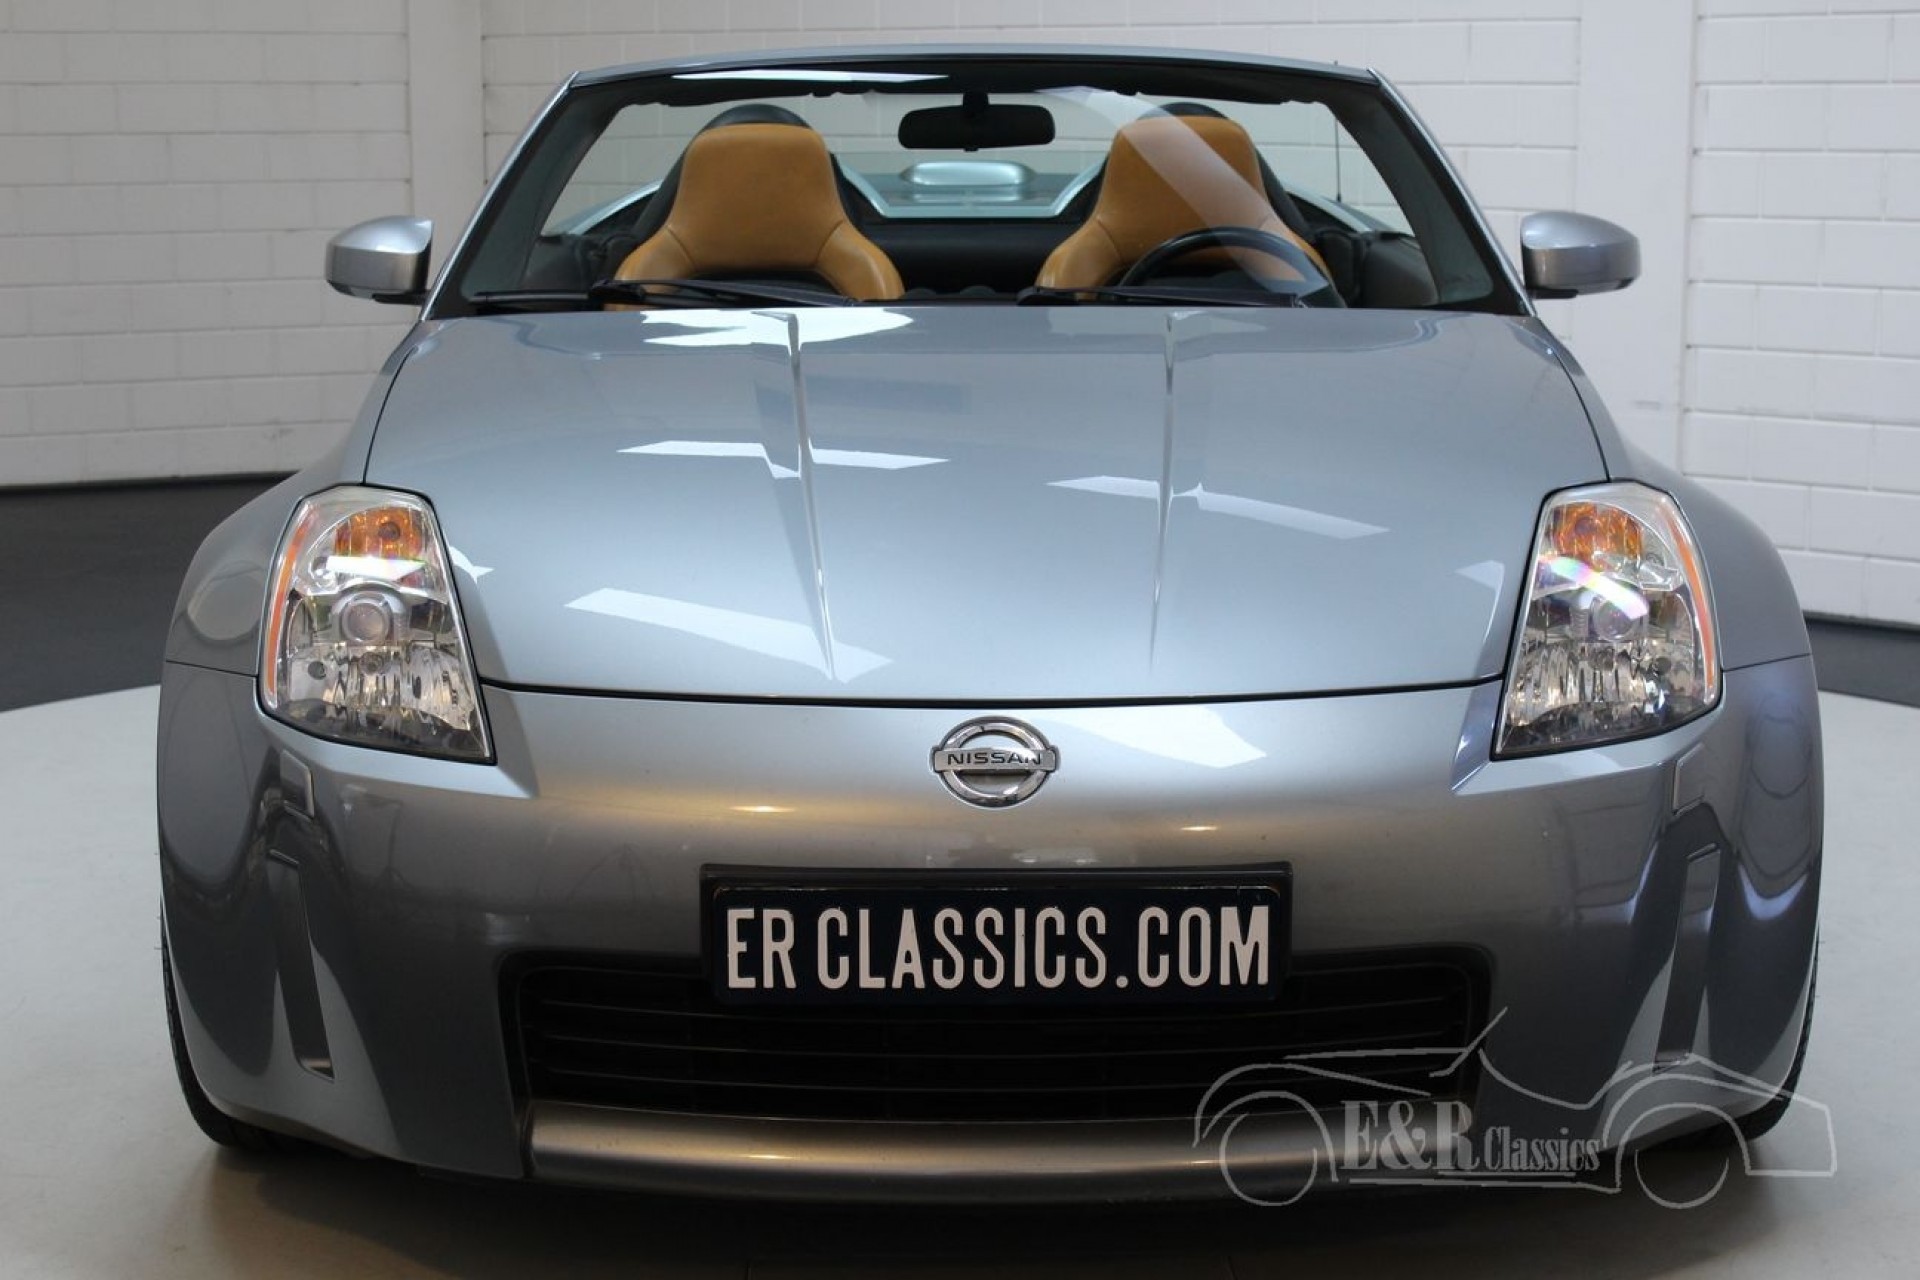 Nissan 350z Cabriolet 2005 New Soft Top For Sale At Erclassics [ 1280 x 1920 Pixel ]